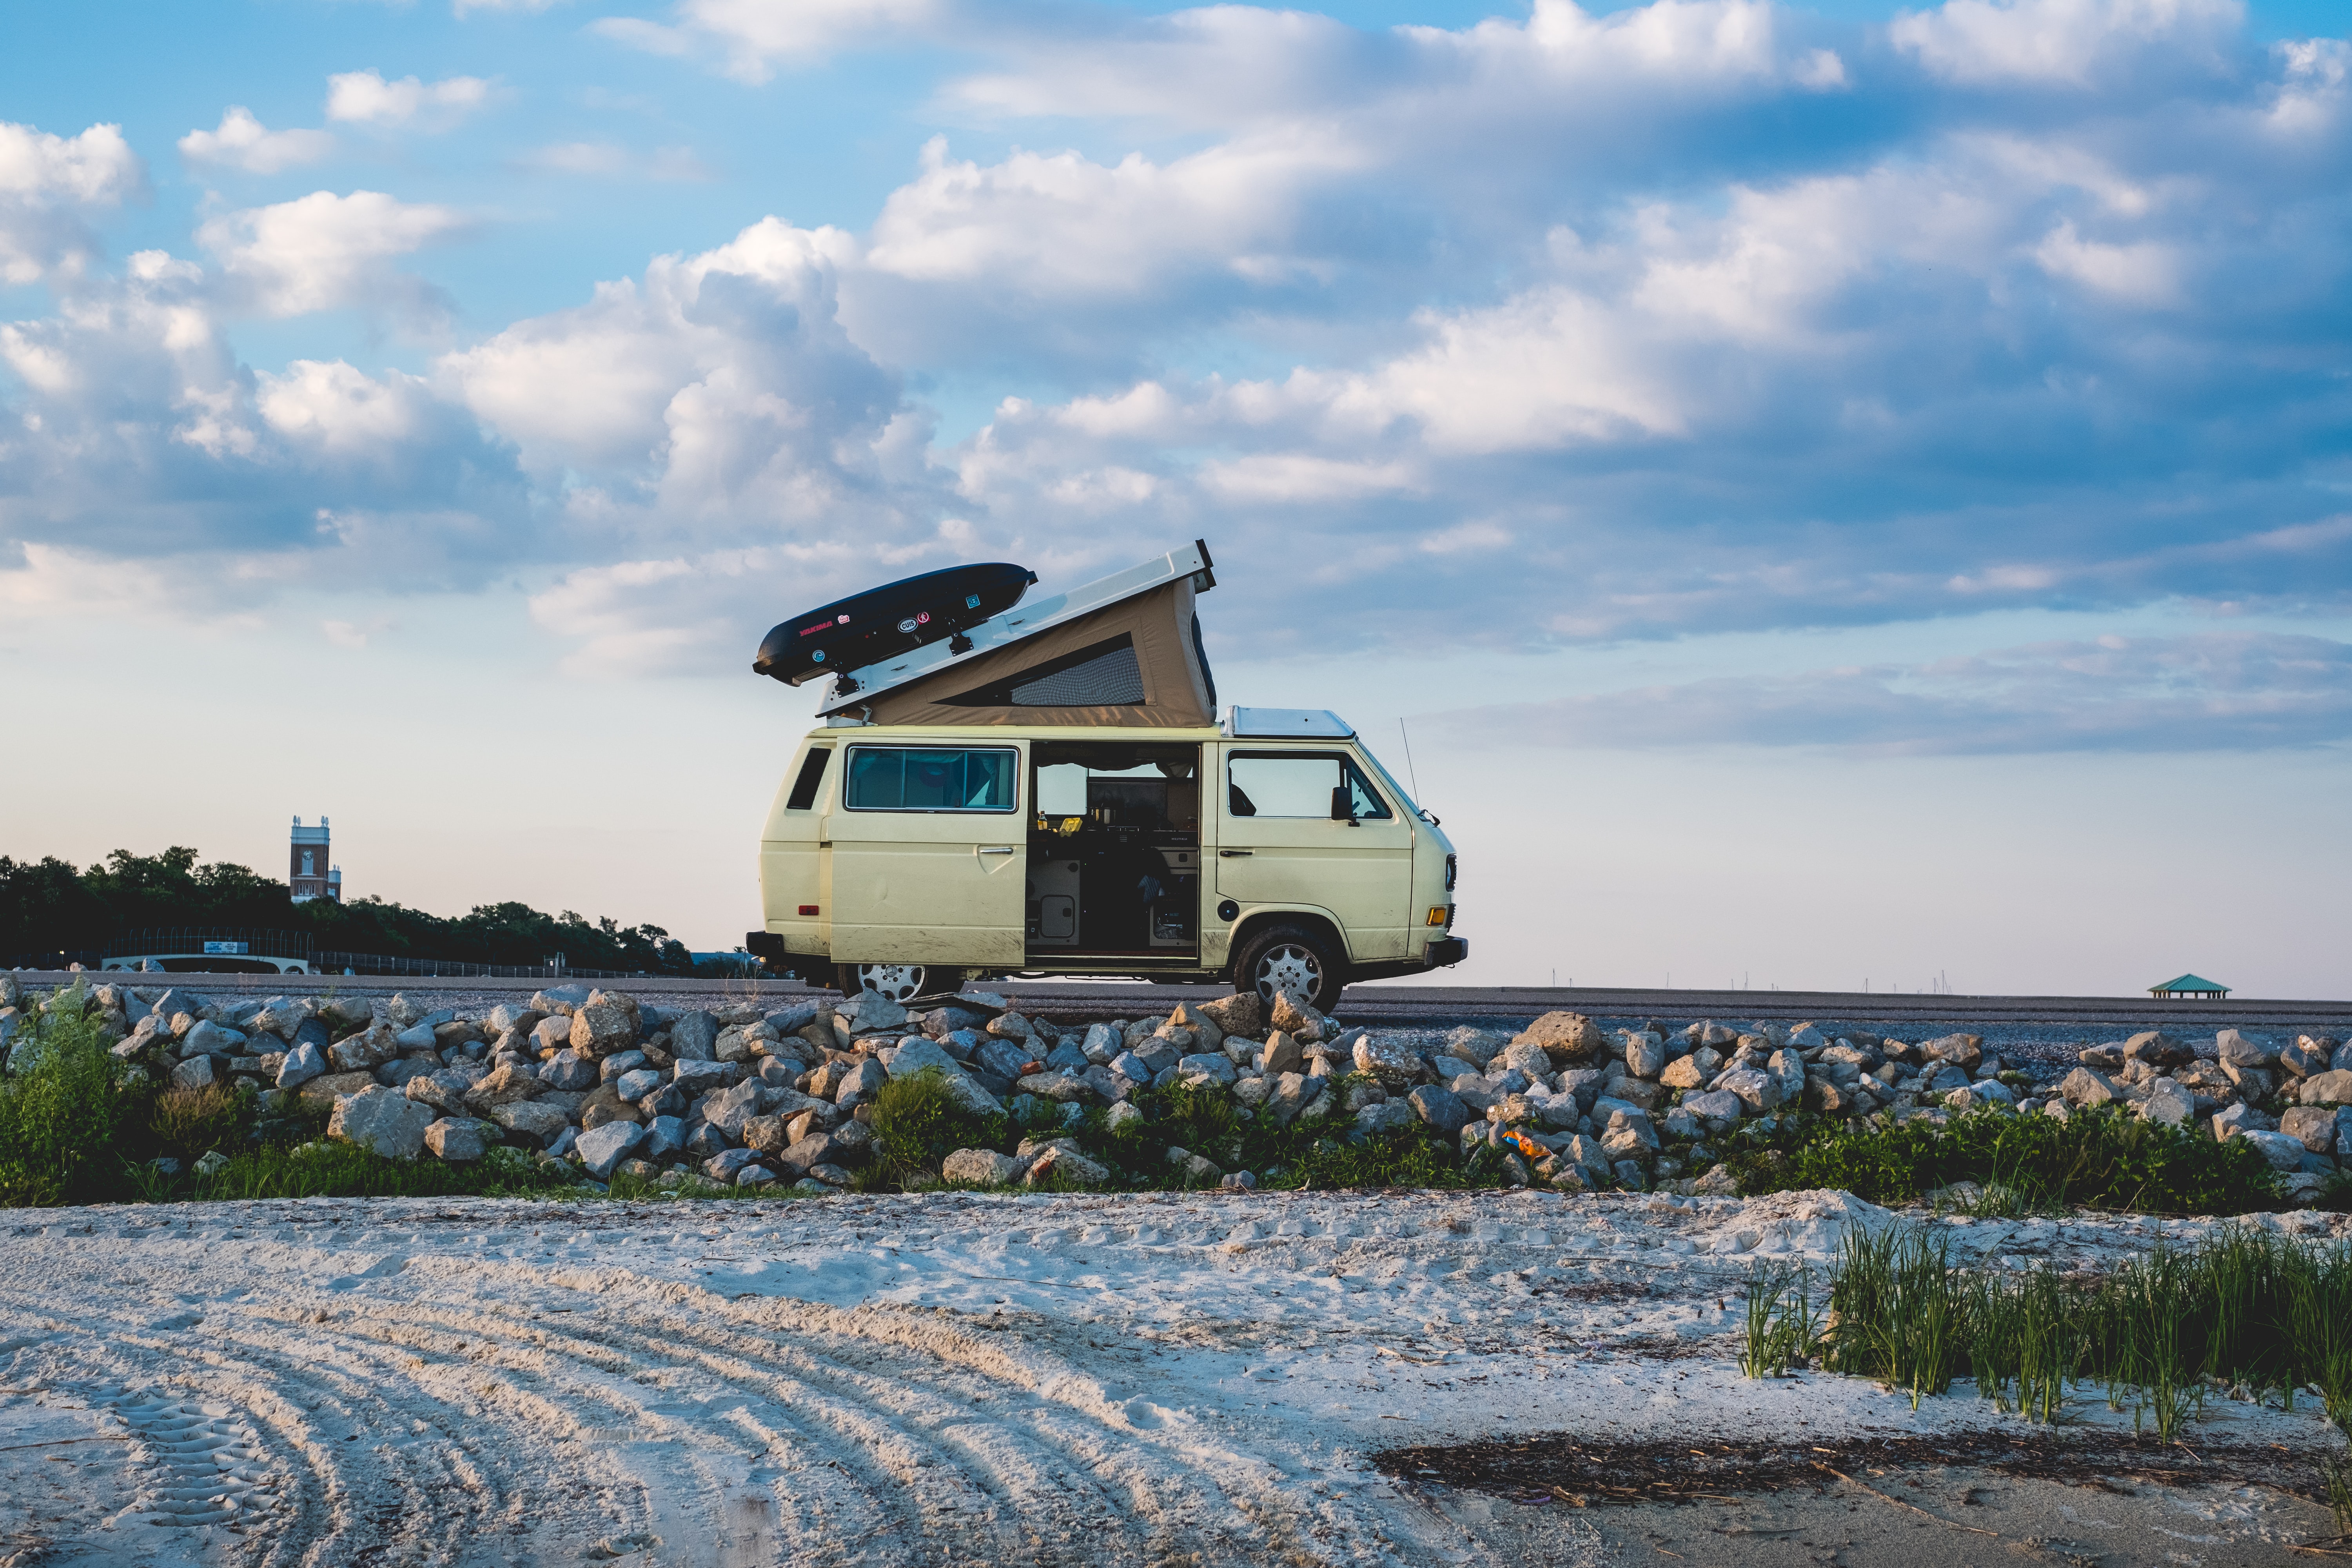 Find the Balance: #Vanlife - How not to turn a trend into a nuisance